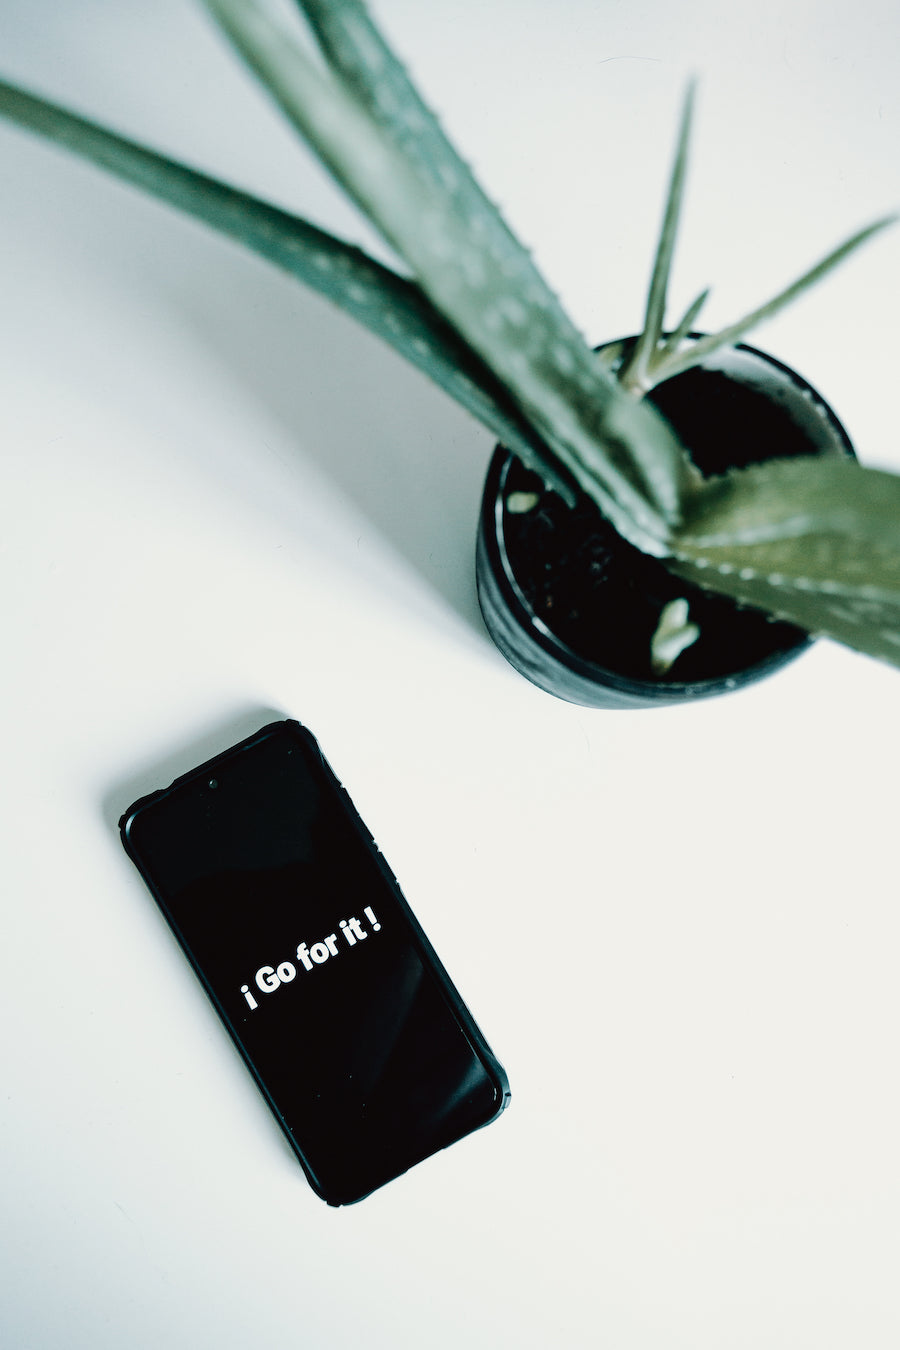 Plant next to phone with motivating message